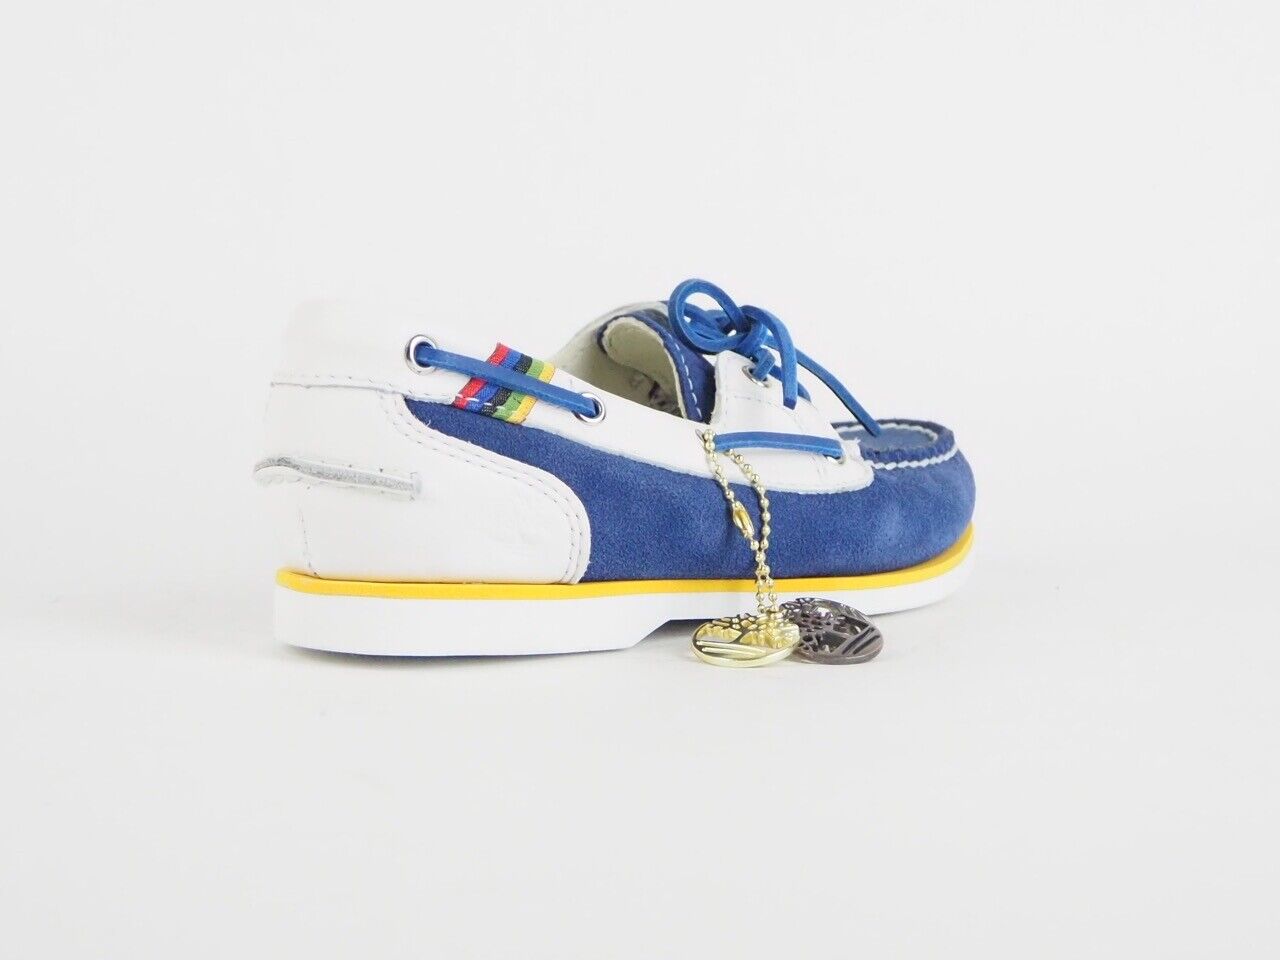 Womens Timberland Amherst 2 Eye Boat 42674 Blue White Leather Boat Shoes - London Top Style